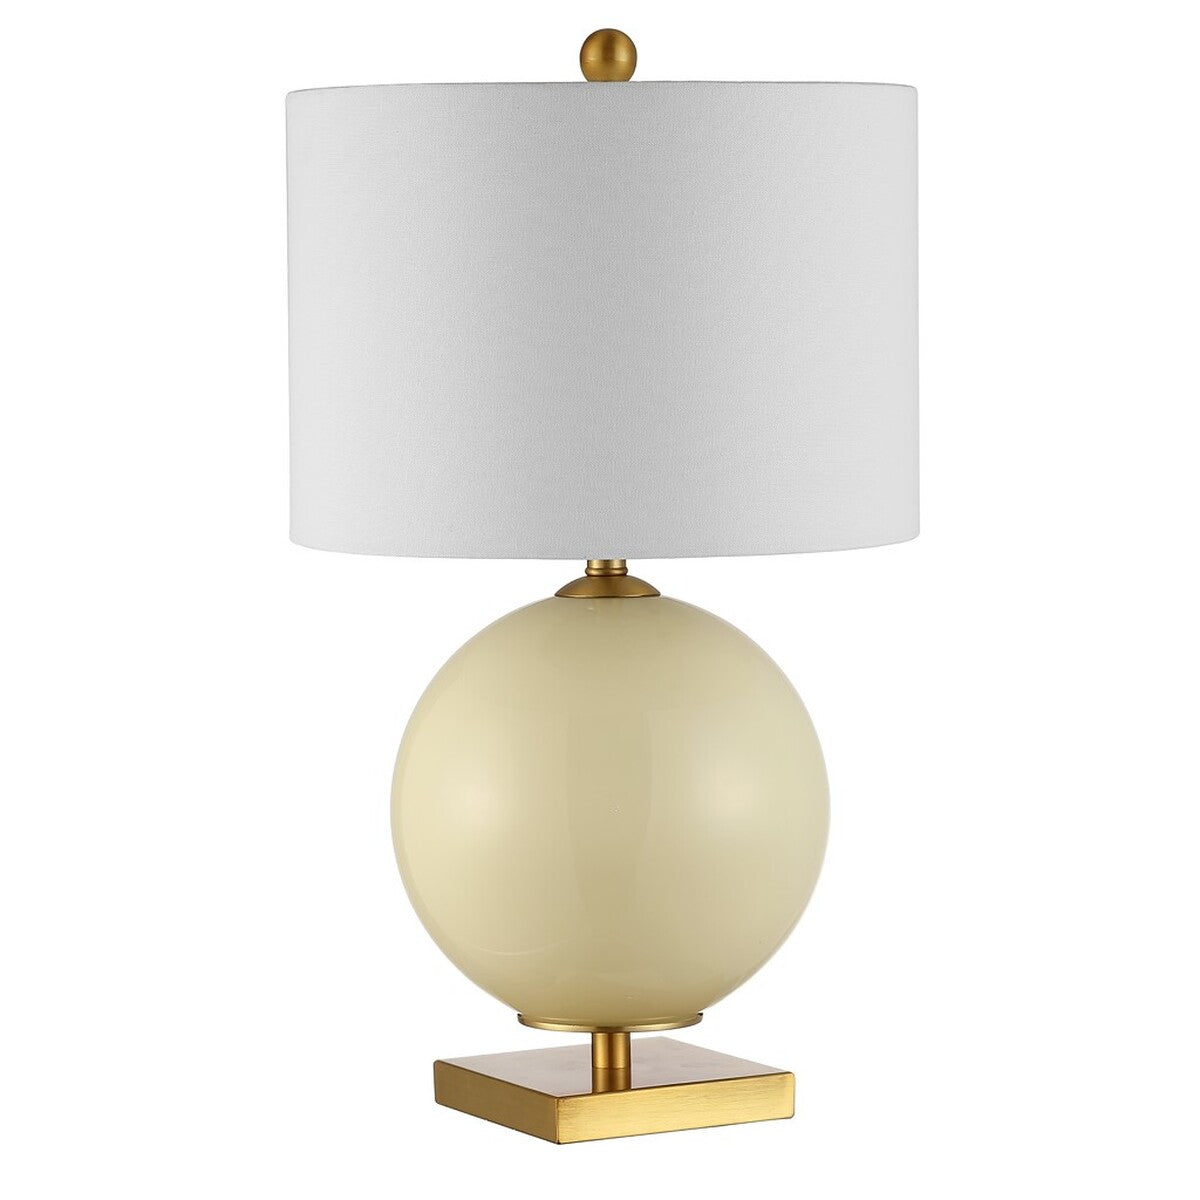 Set of Two Cream Glass Globe Table Lamp by Kevin Francis Design | Luxury Home Decor